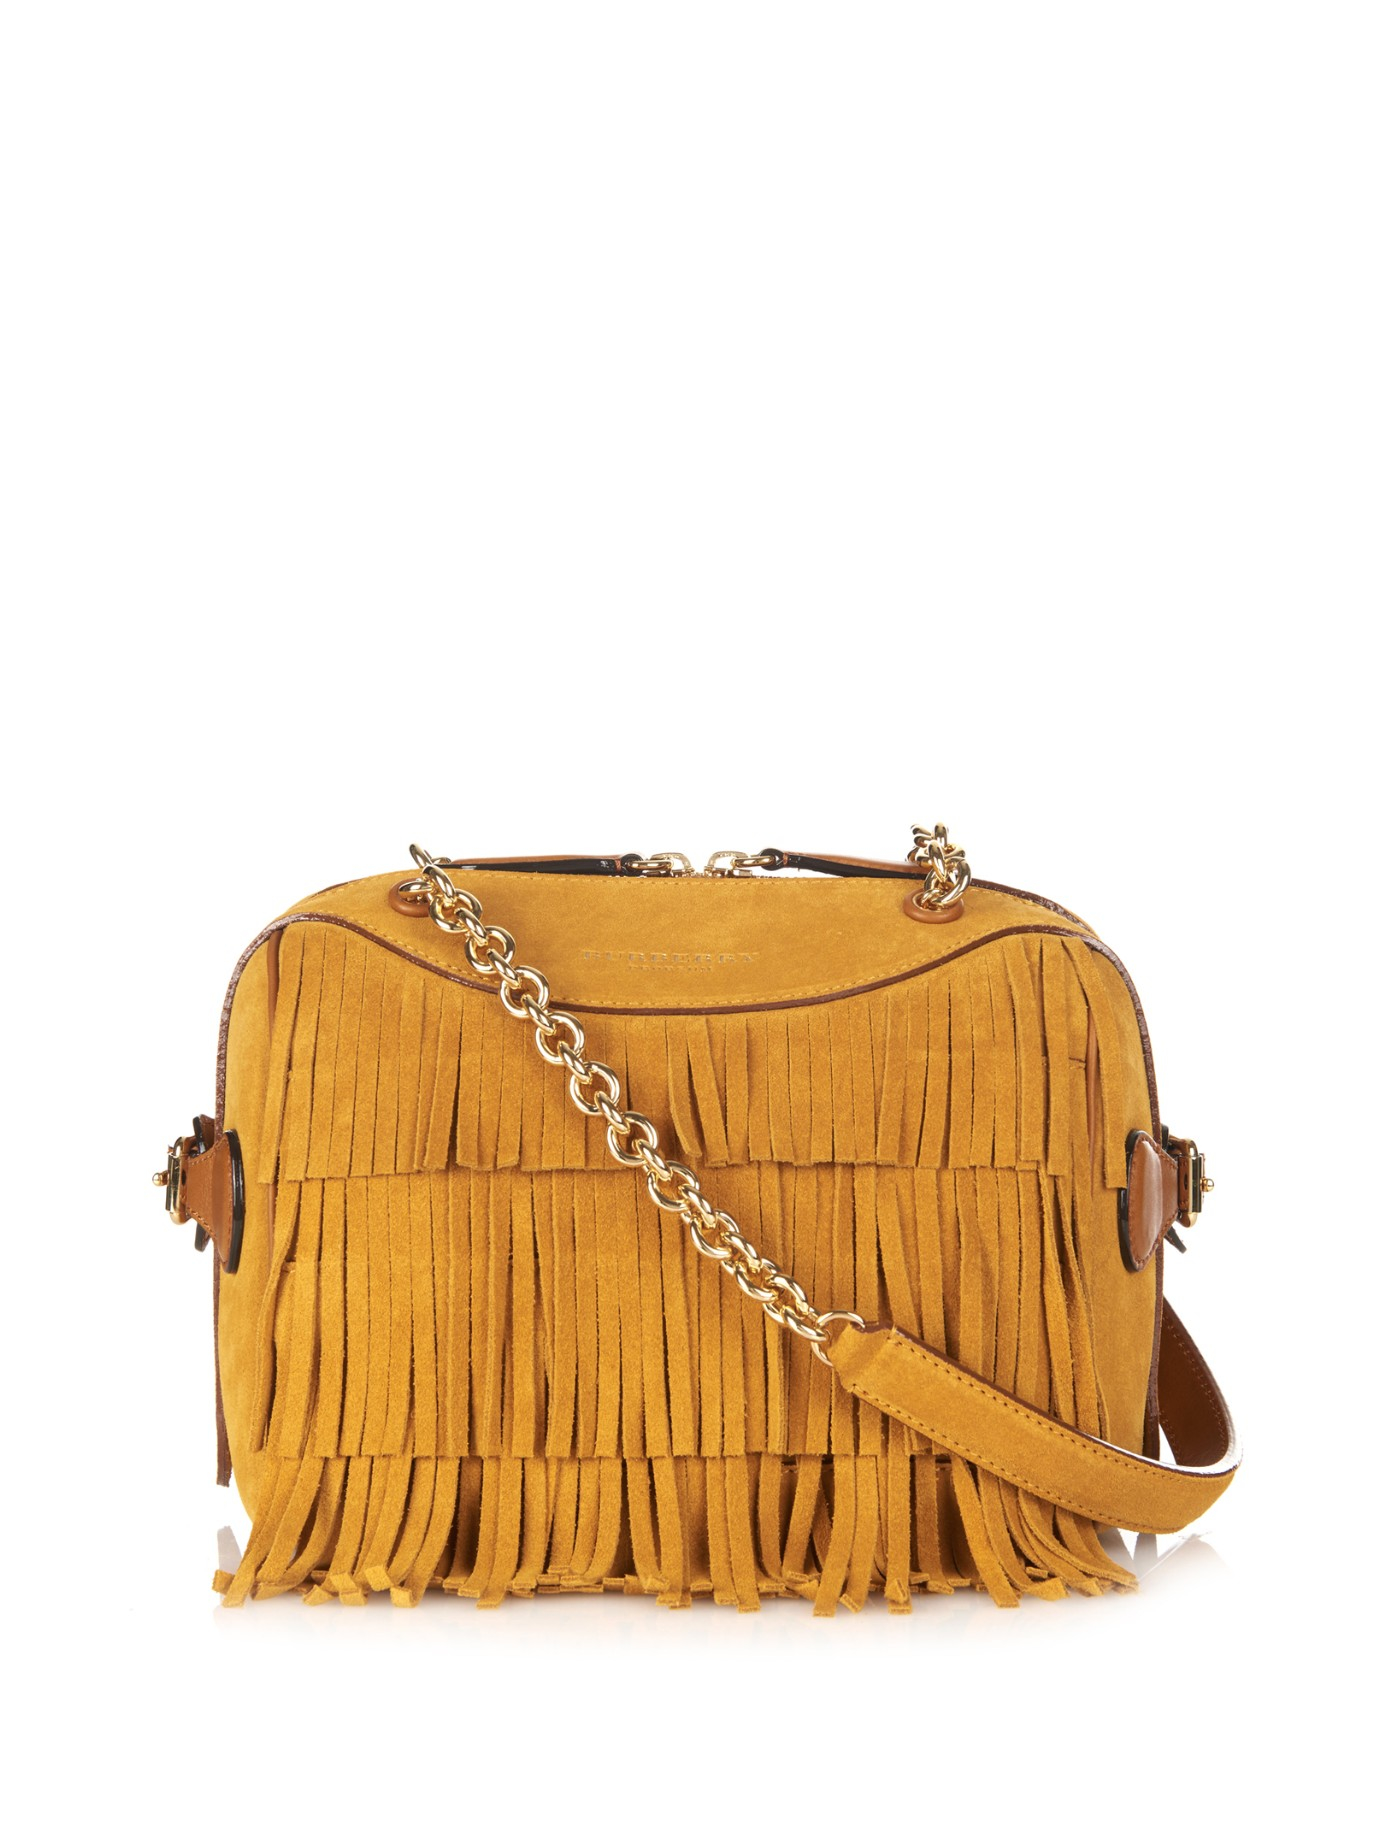 Burberry prorsum Mini Bee Fringed Suede Shoulder Bag in Brown | Lyst